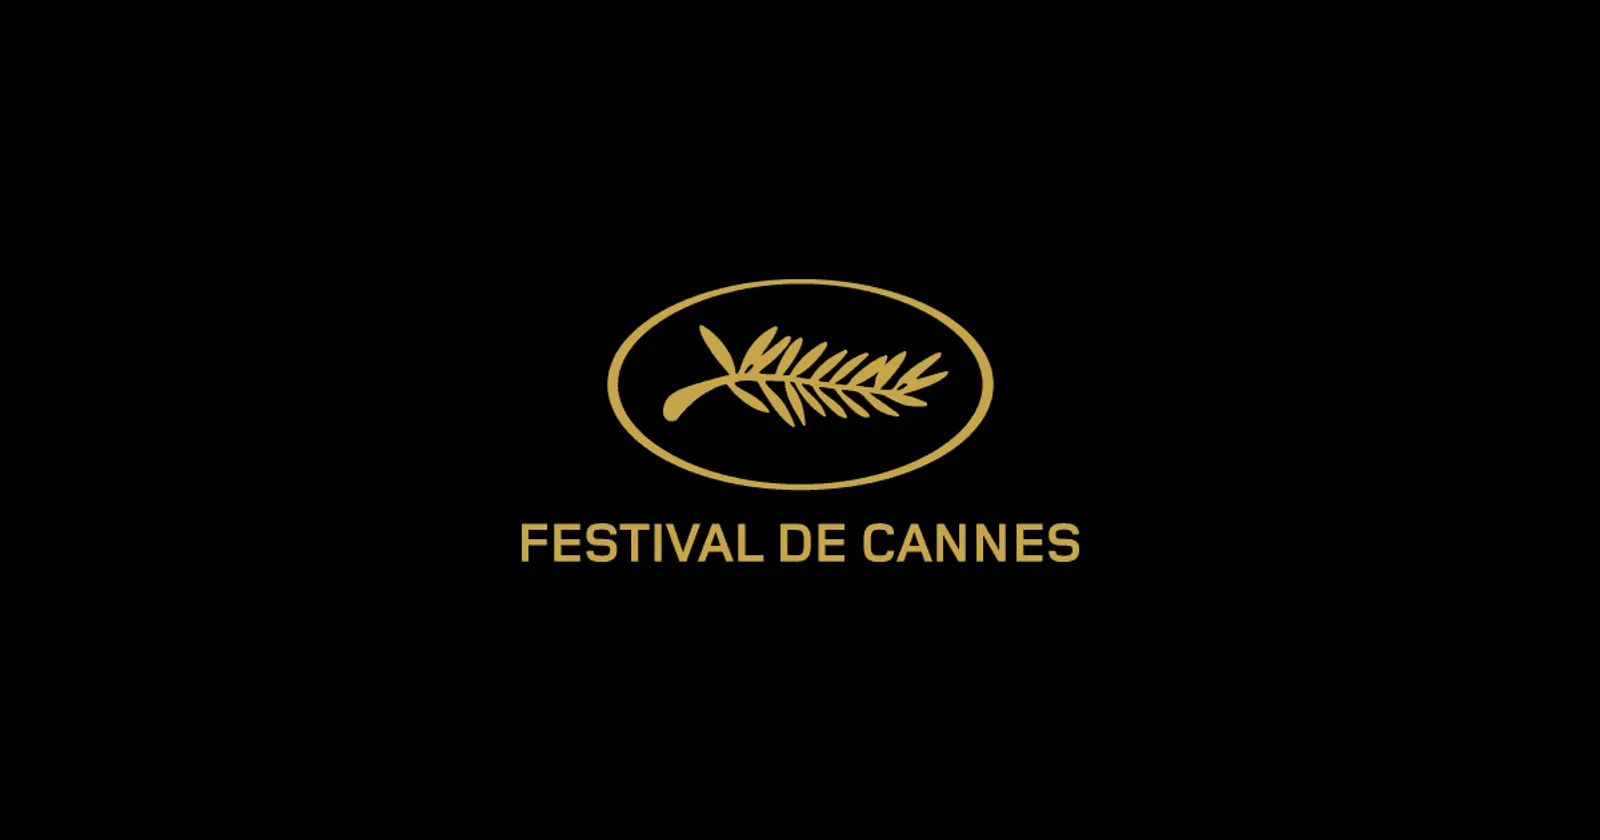 Cannes 2023: Date, Dress Code, Bollywood Actor Debut, Ticket Prices, and More Information